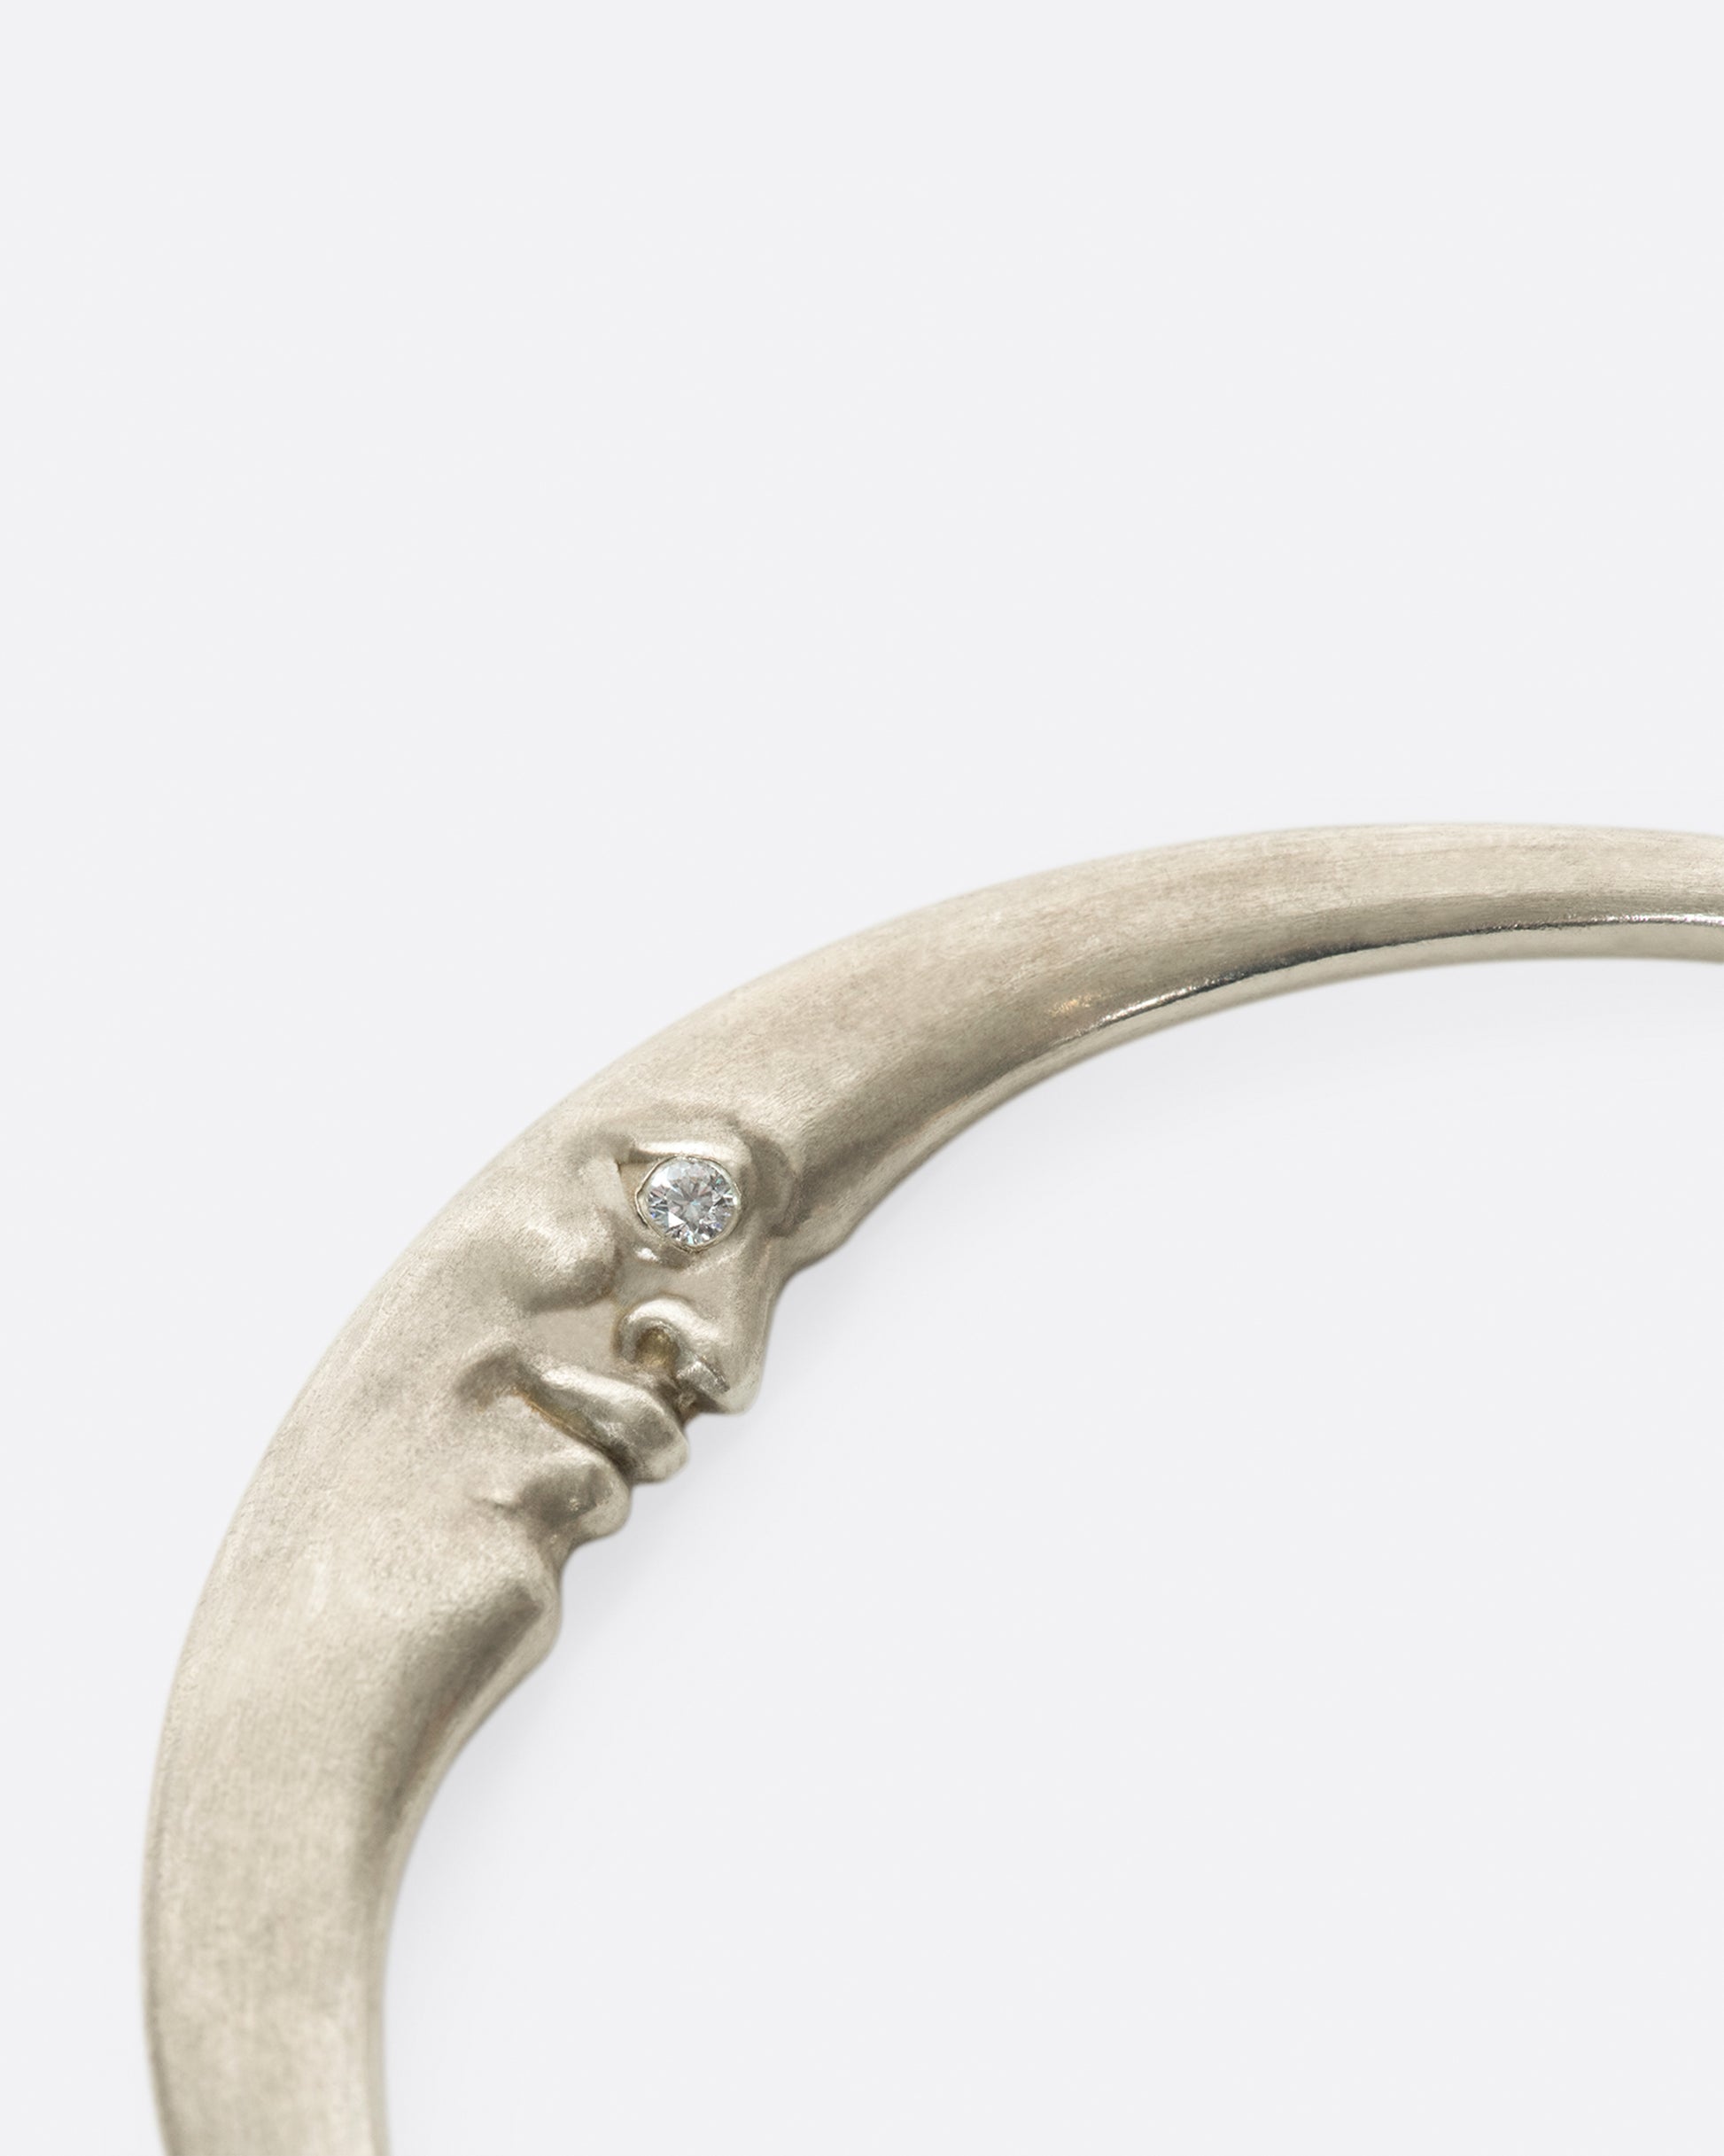 A seemingly simple bangle with a hidden crescent moonface and diamond eyes, only visible from the side.